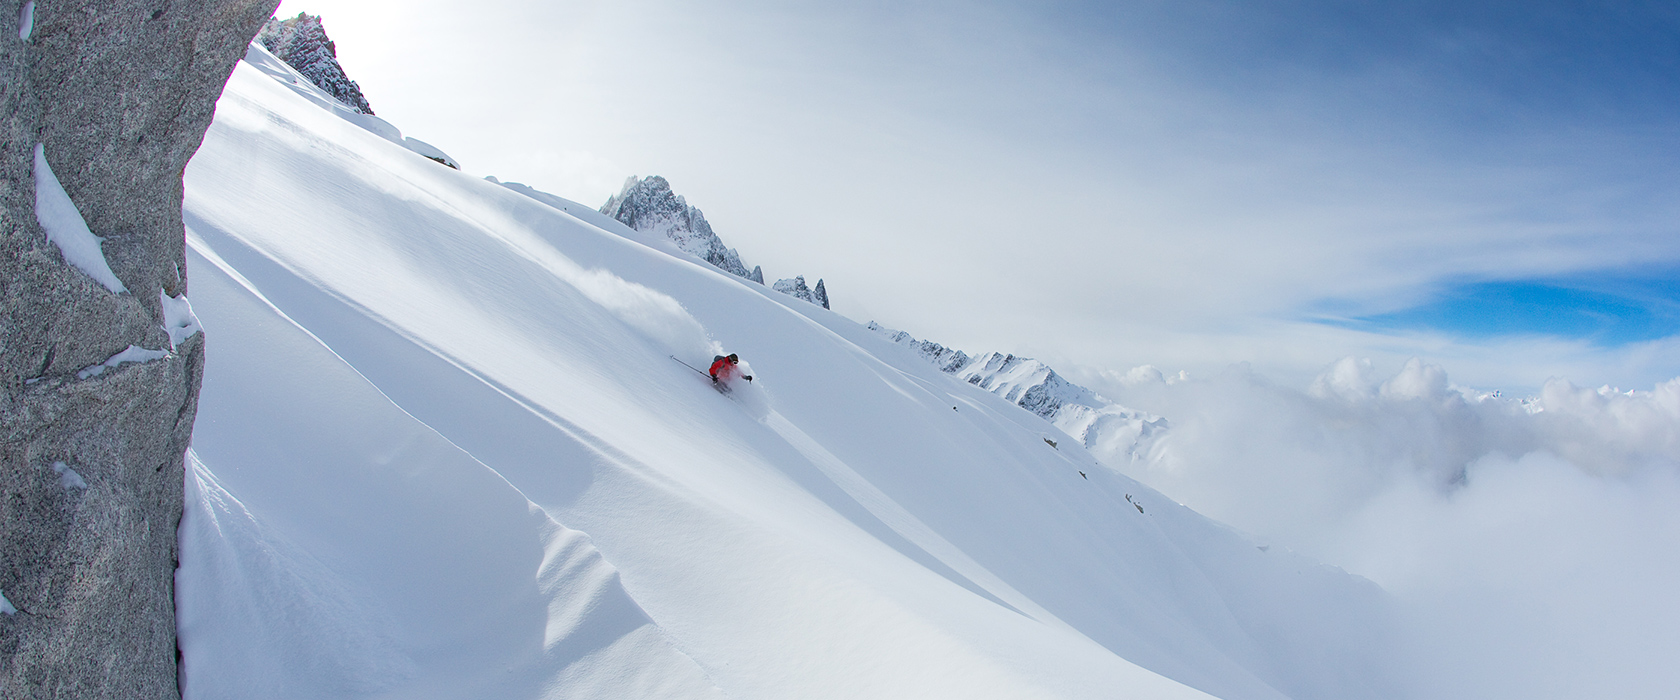 Book you activities and ski lessons in Chamonix with Pointe Isabelle